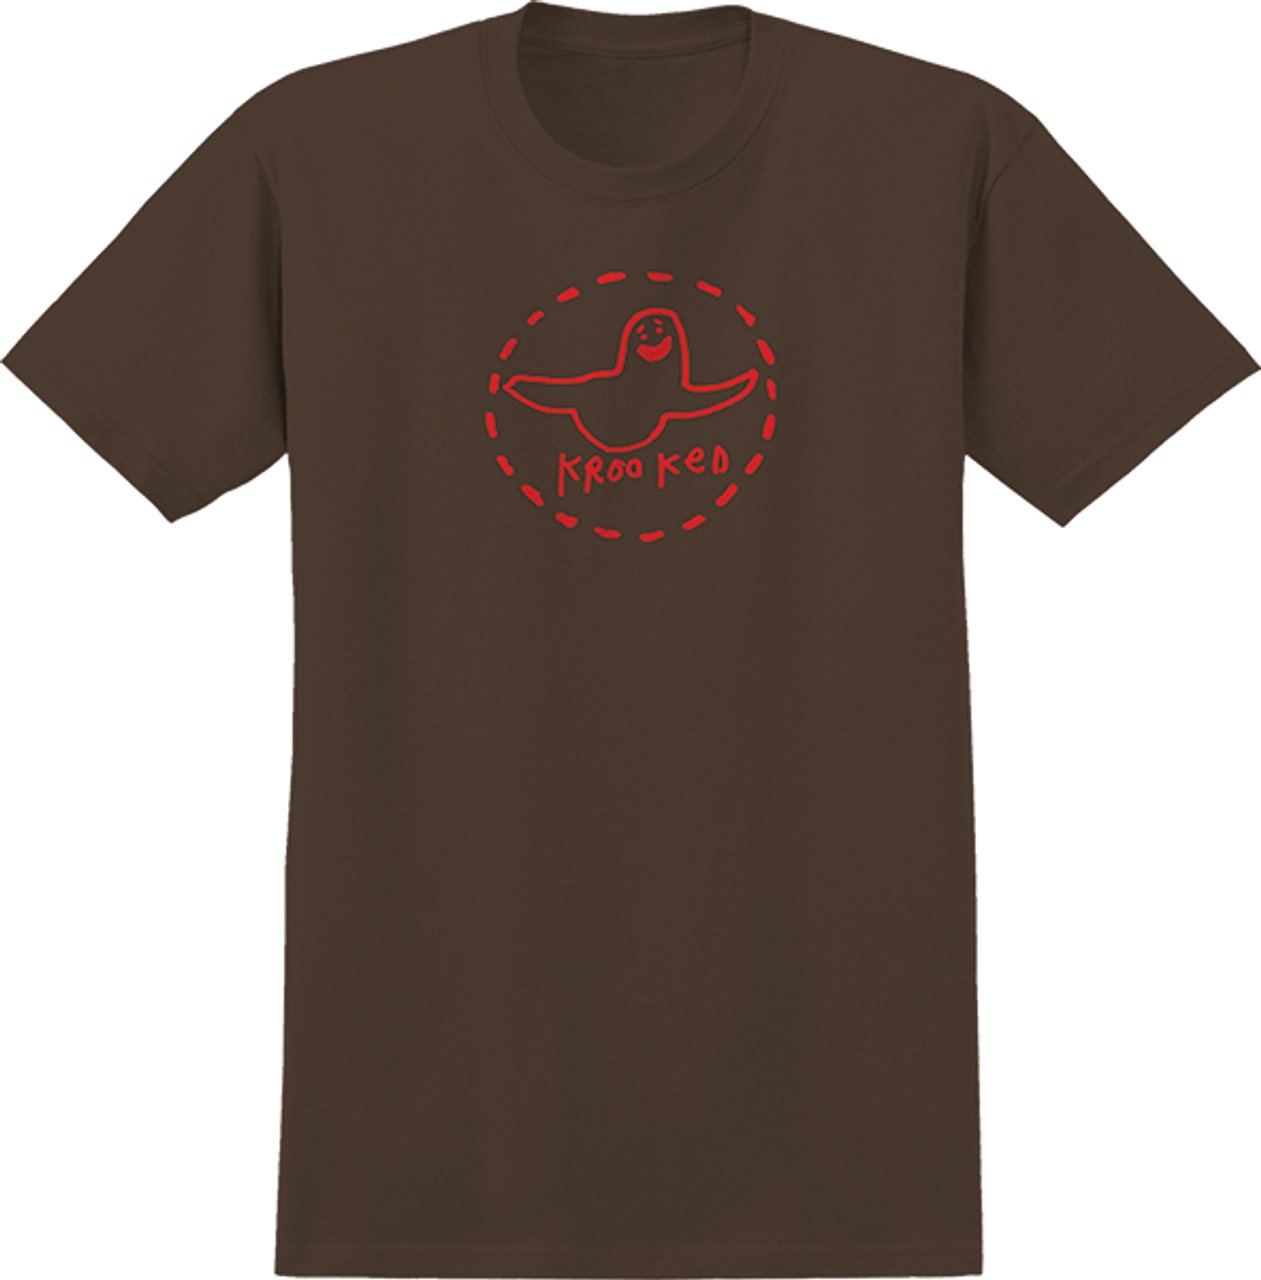 KROOKED TRINITY SMILE SS TSHIRT SMALL BROWN/RED